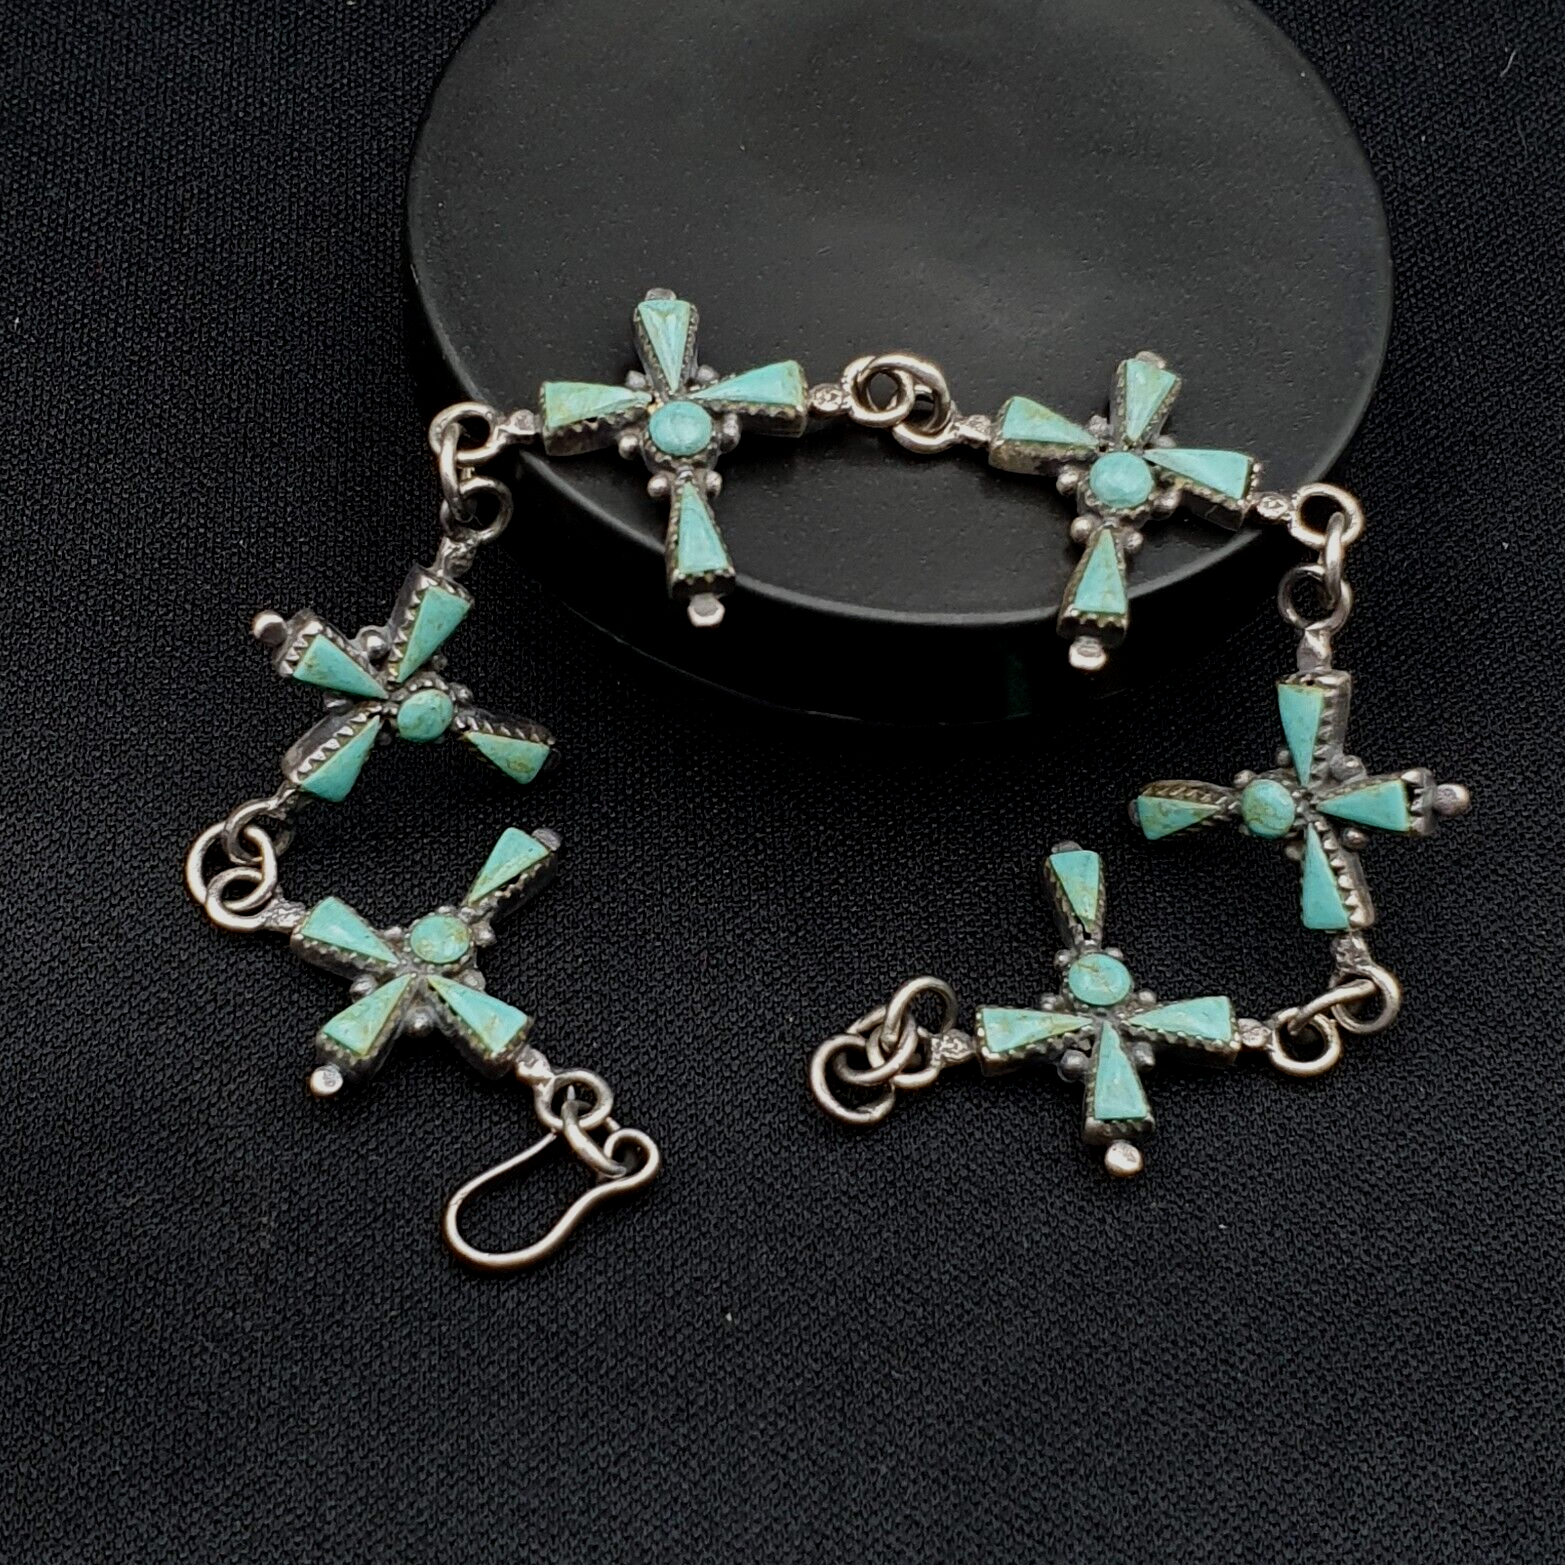 "Vintage sterling silver bracelet featuring a natural turquoise cross pendant, showcasing a vibrant blue-green stone with unique veining patterns, set in a intricately detailed silver setting, evoking a sense of classic Southwestern style and elegance."